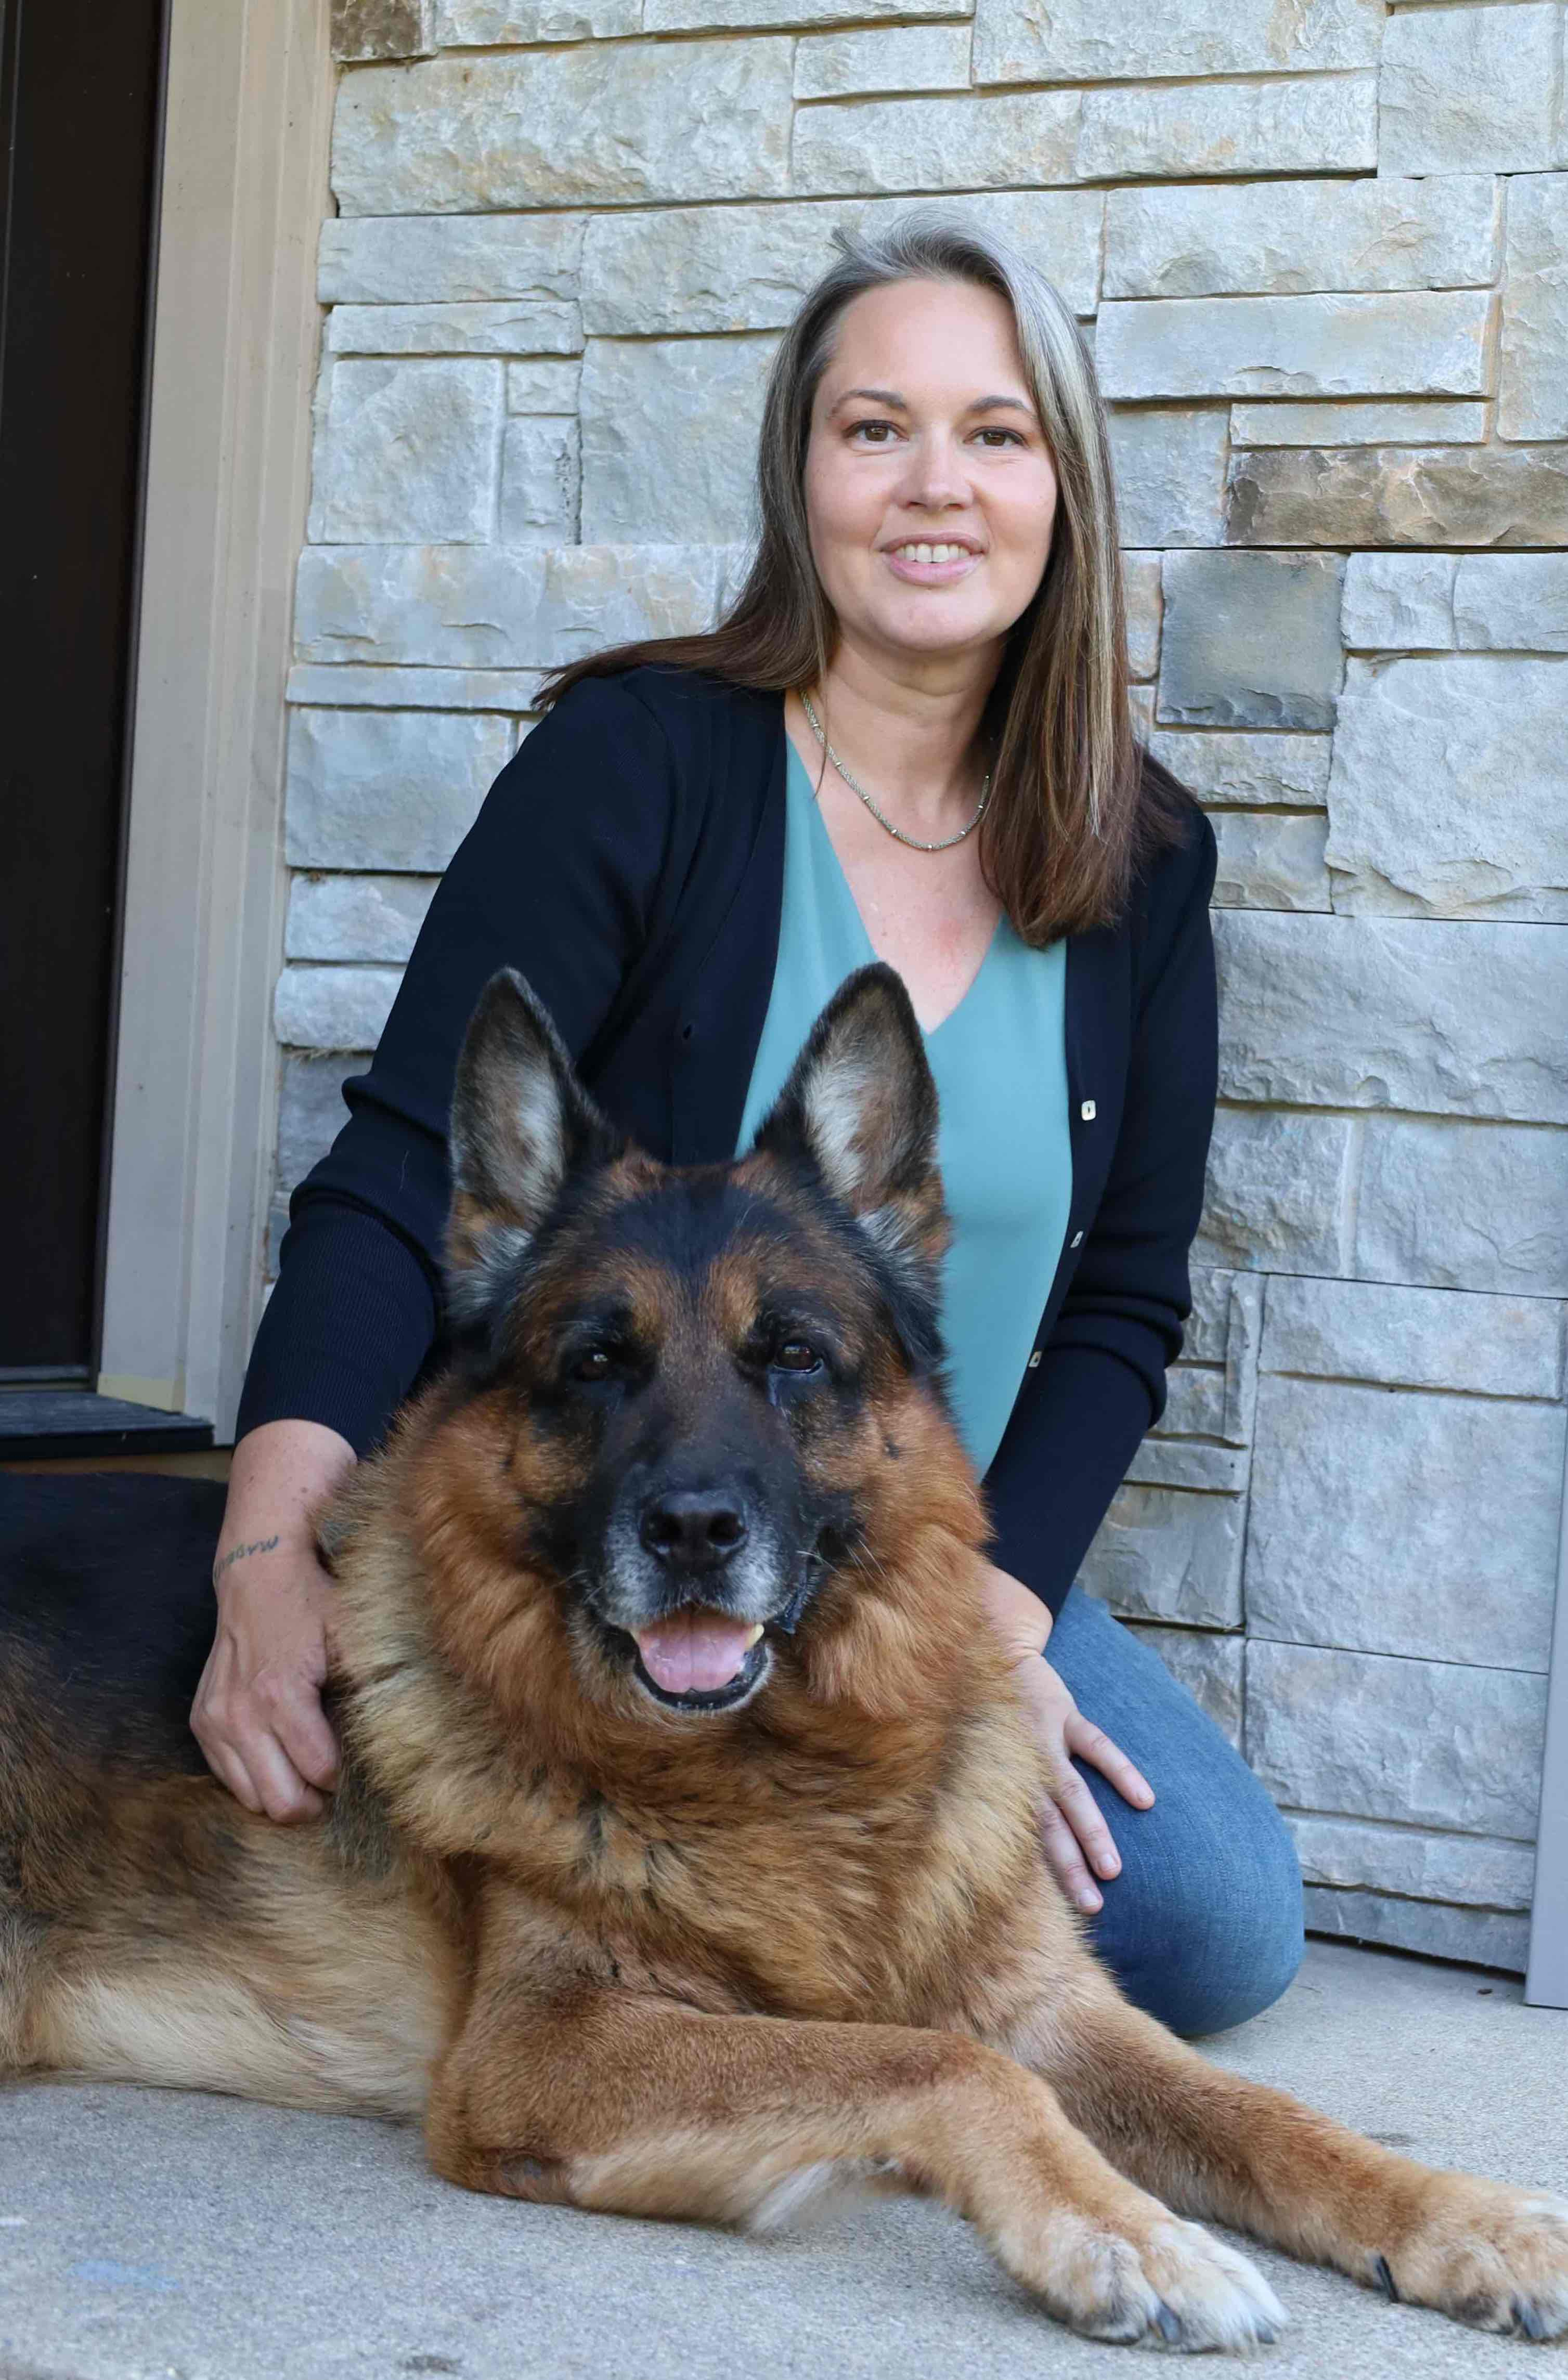 Crystal Lake German Shepherd breeder offers insights into industry ethics